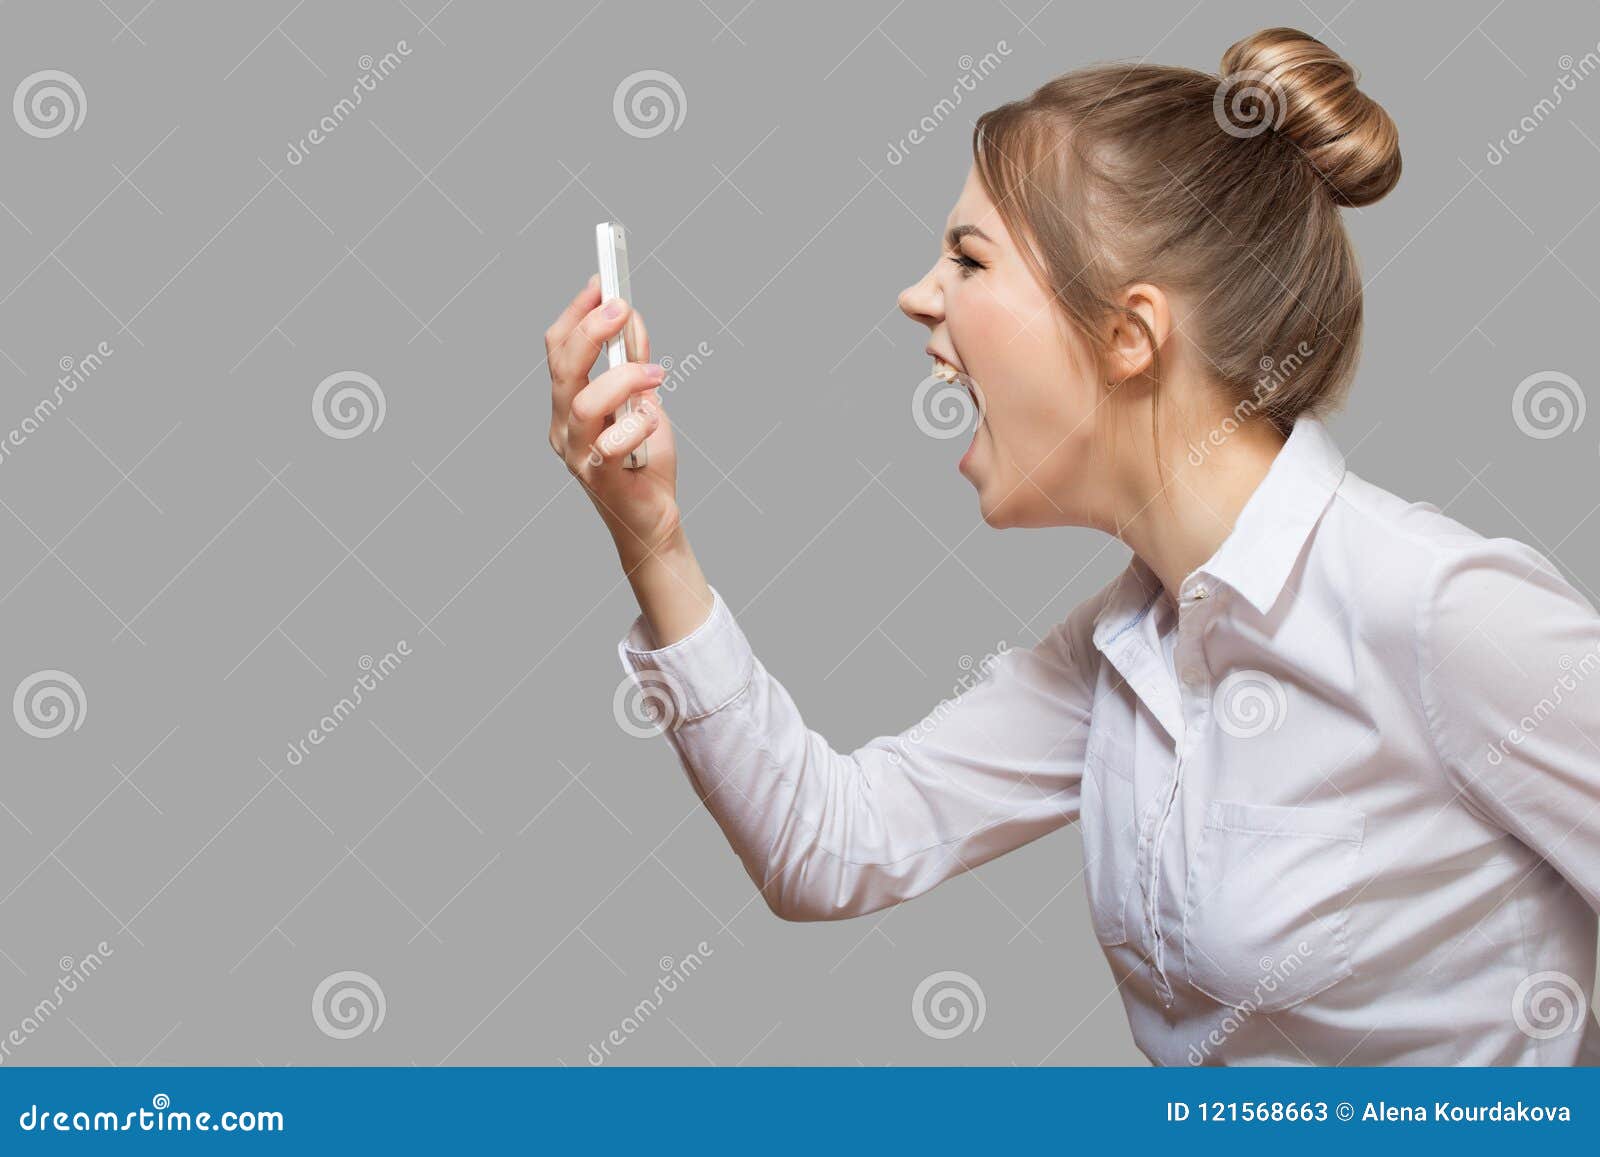 woman yelling into the phone